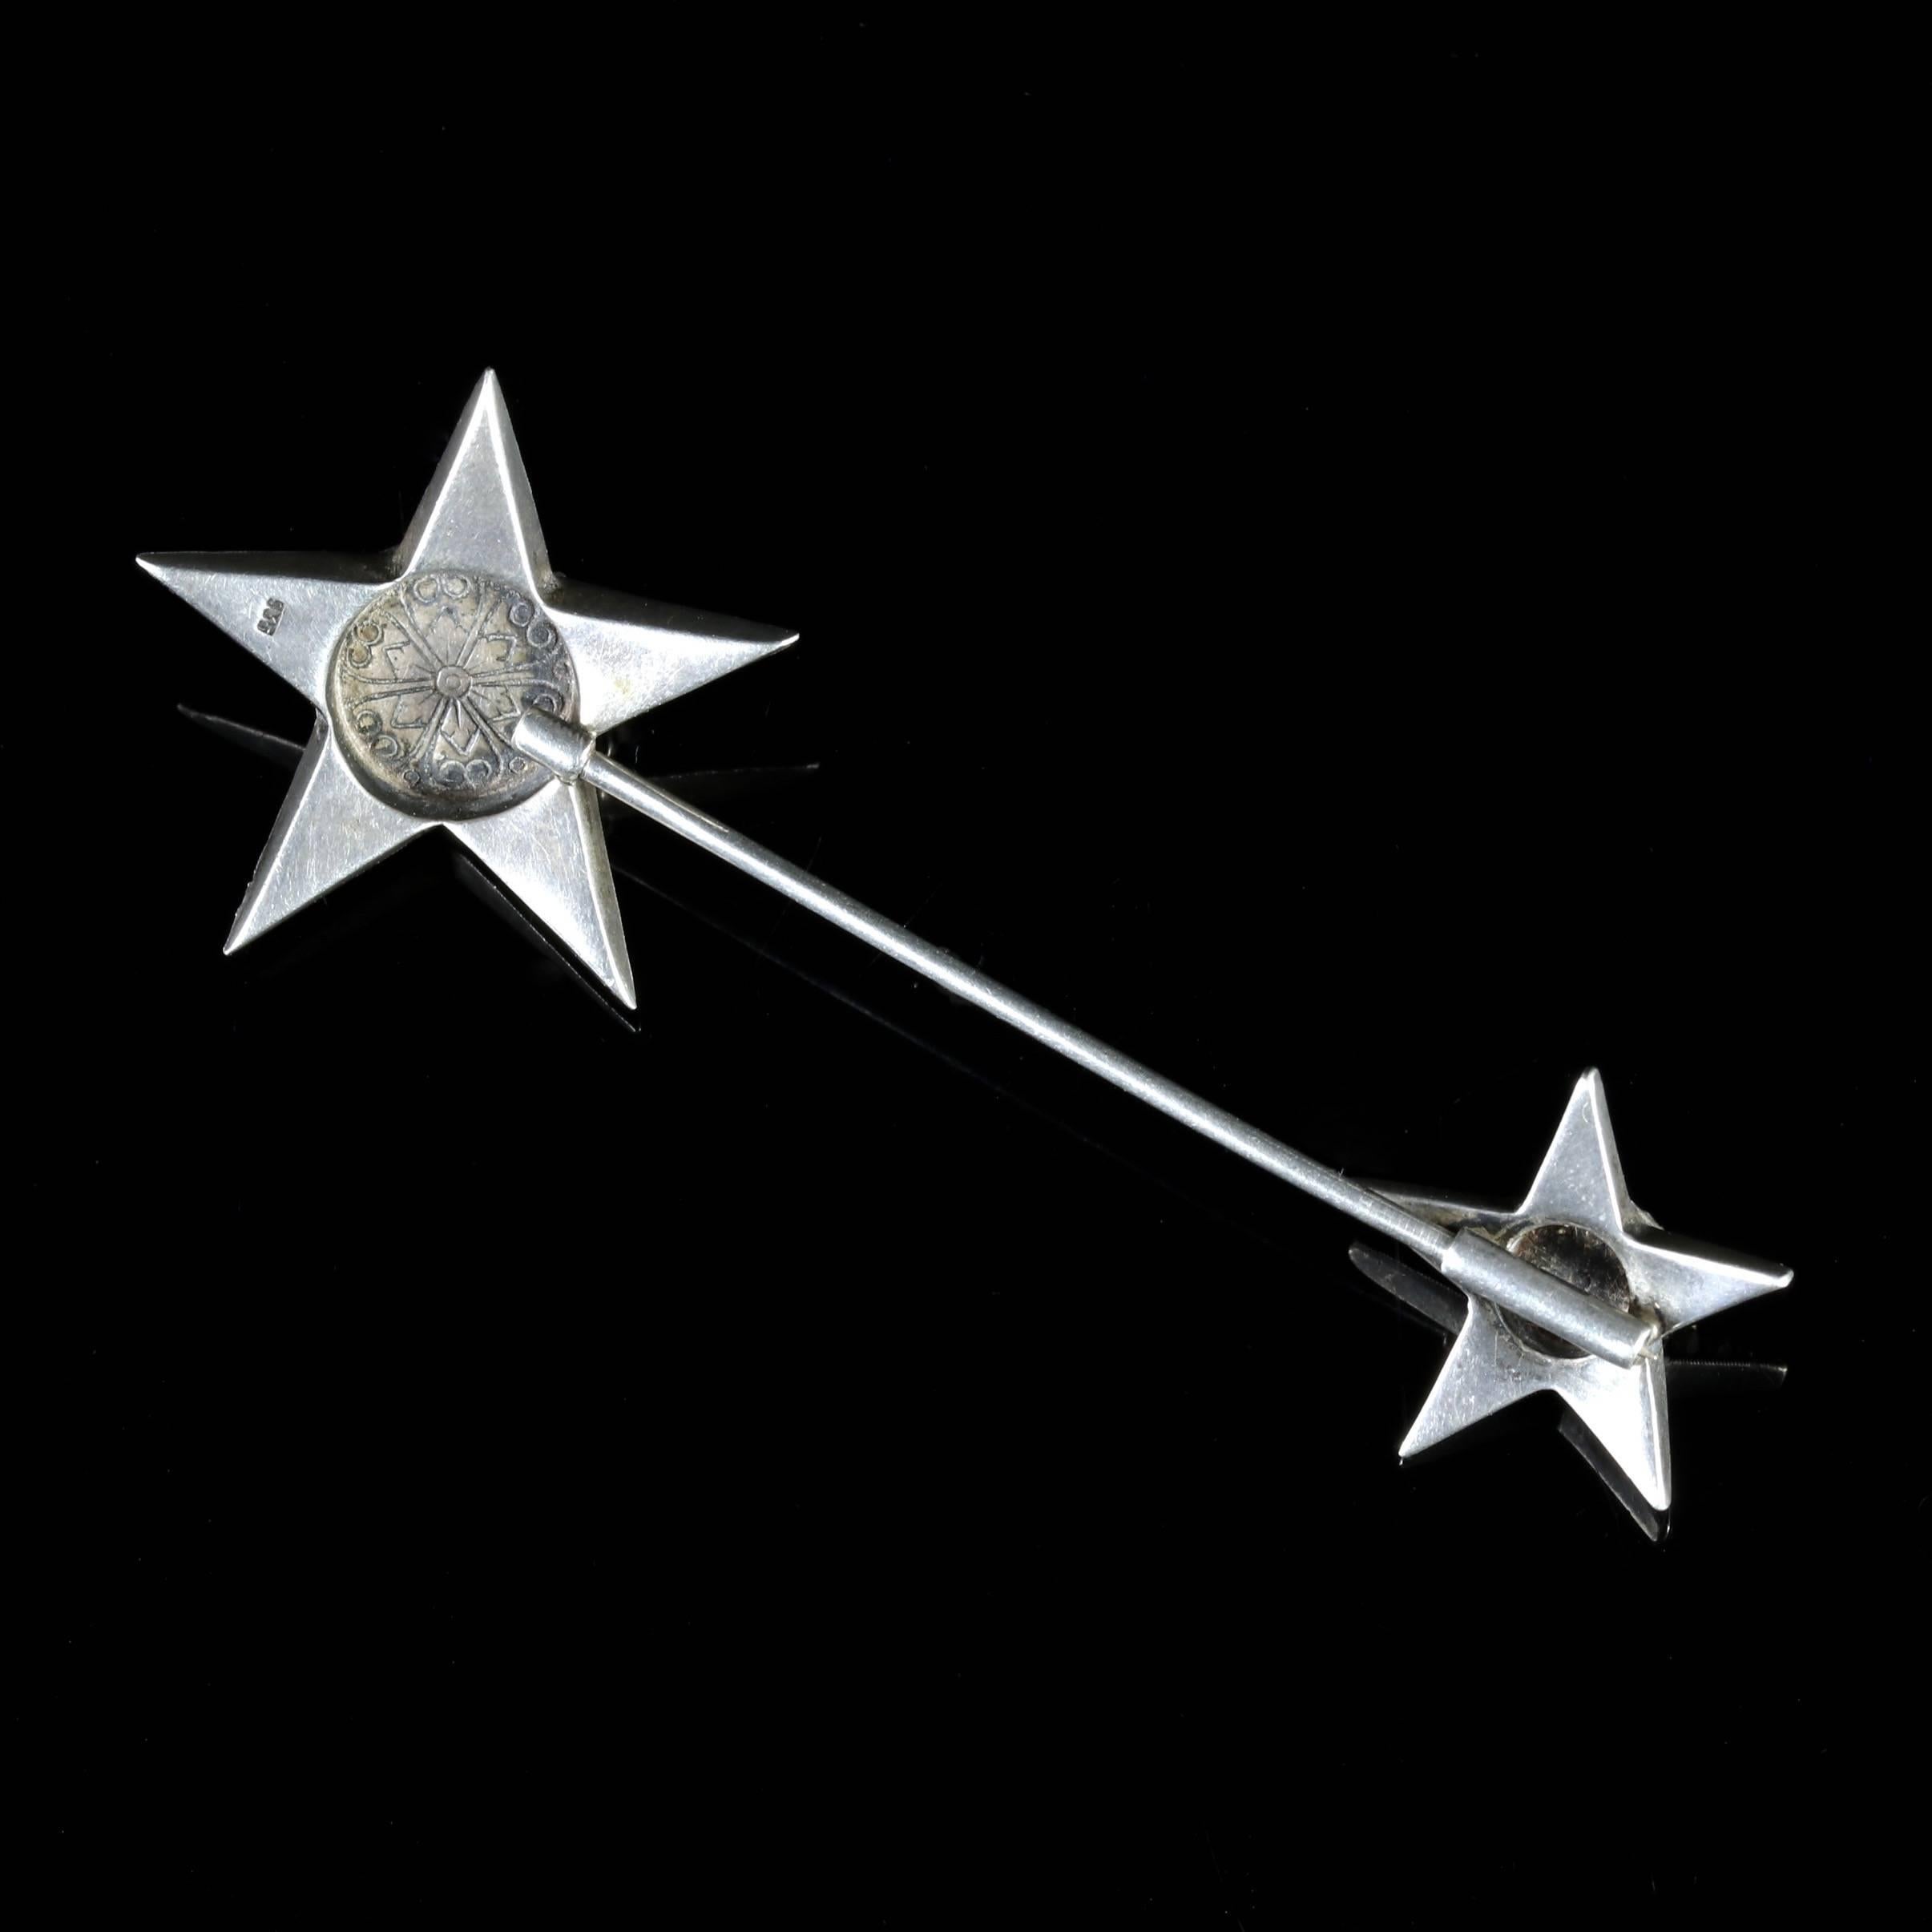 This fabulous Sterling Silver Star Jabot Paste pin is extremely collectable, Circa 1900.

Jabot pins were originally used to decorate, or fasten a dangling ruffle known as a jabot worn by men on the front of shirts and women on the front of dresses